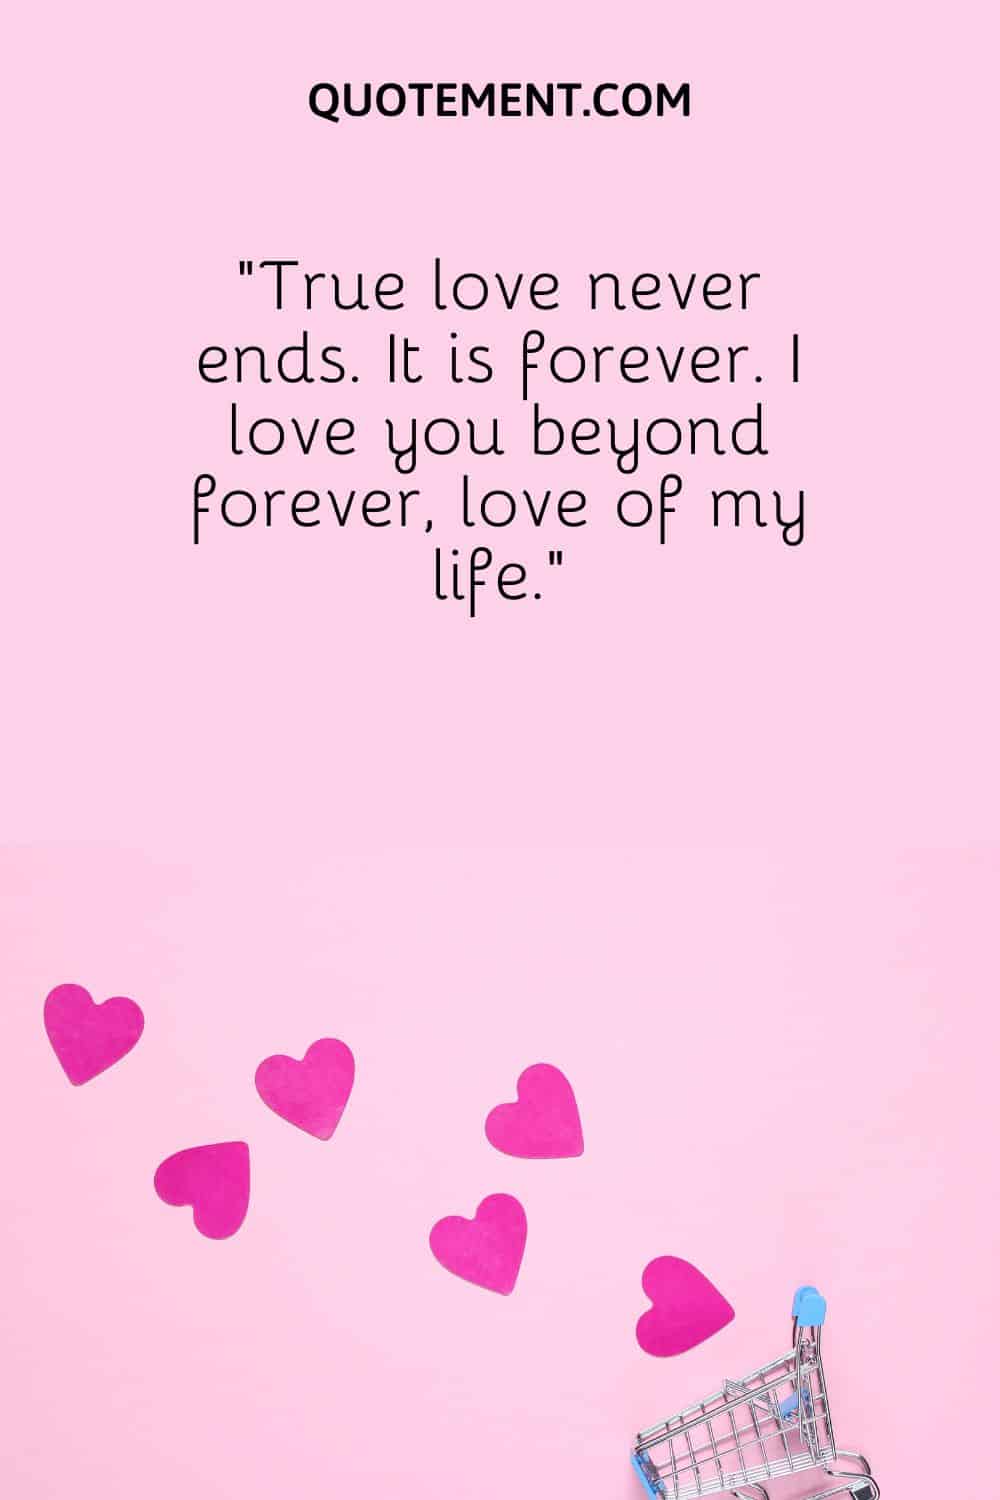 “True love never ends. It is forever. I love you beyond forever, love of my life.”